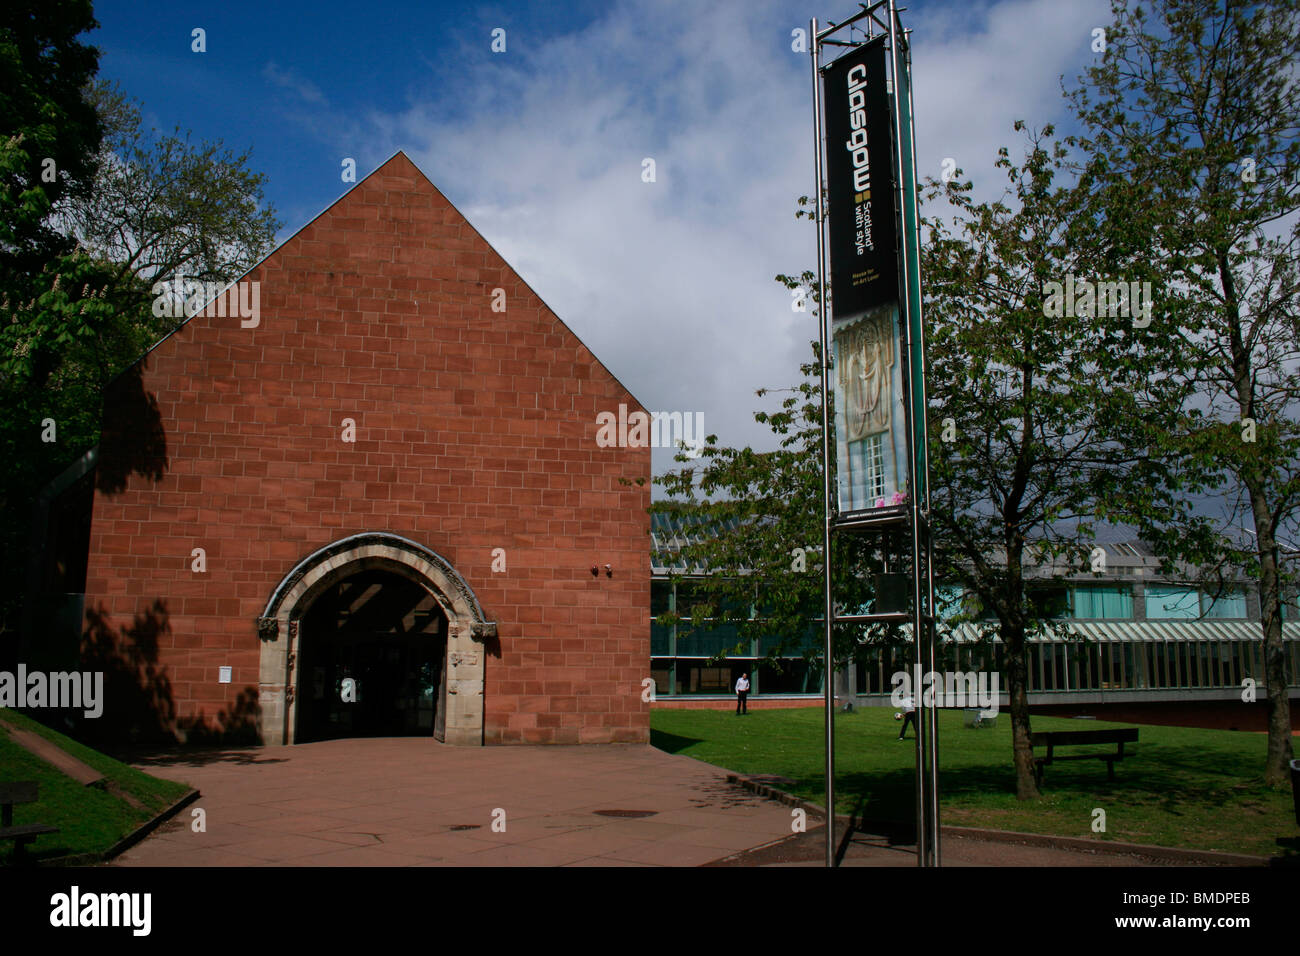 Entrance to the Burrell Collection, Pollok Country Park, Glasgow Stock Photo